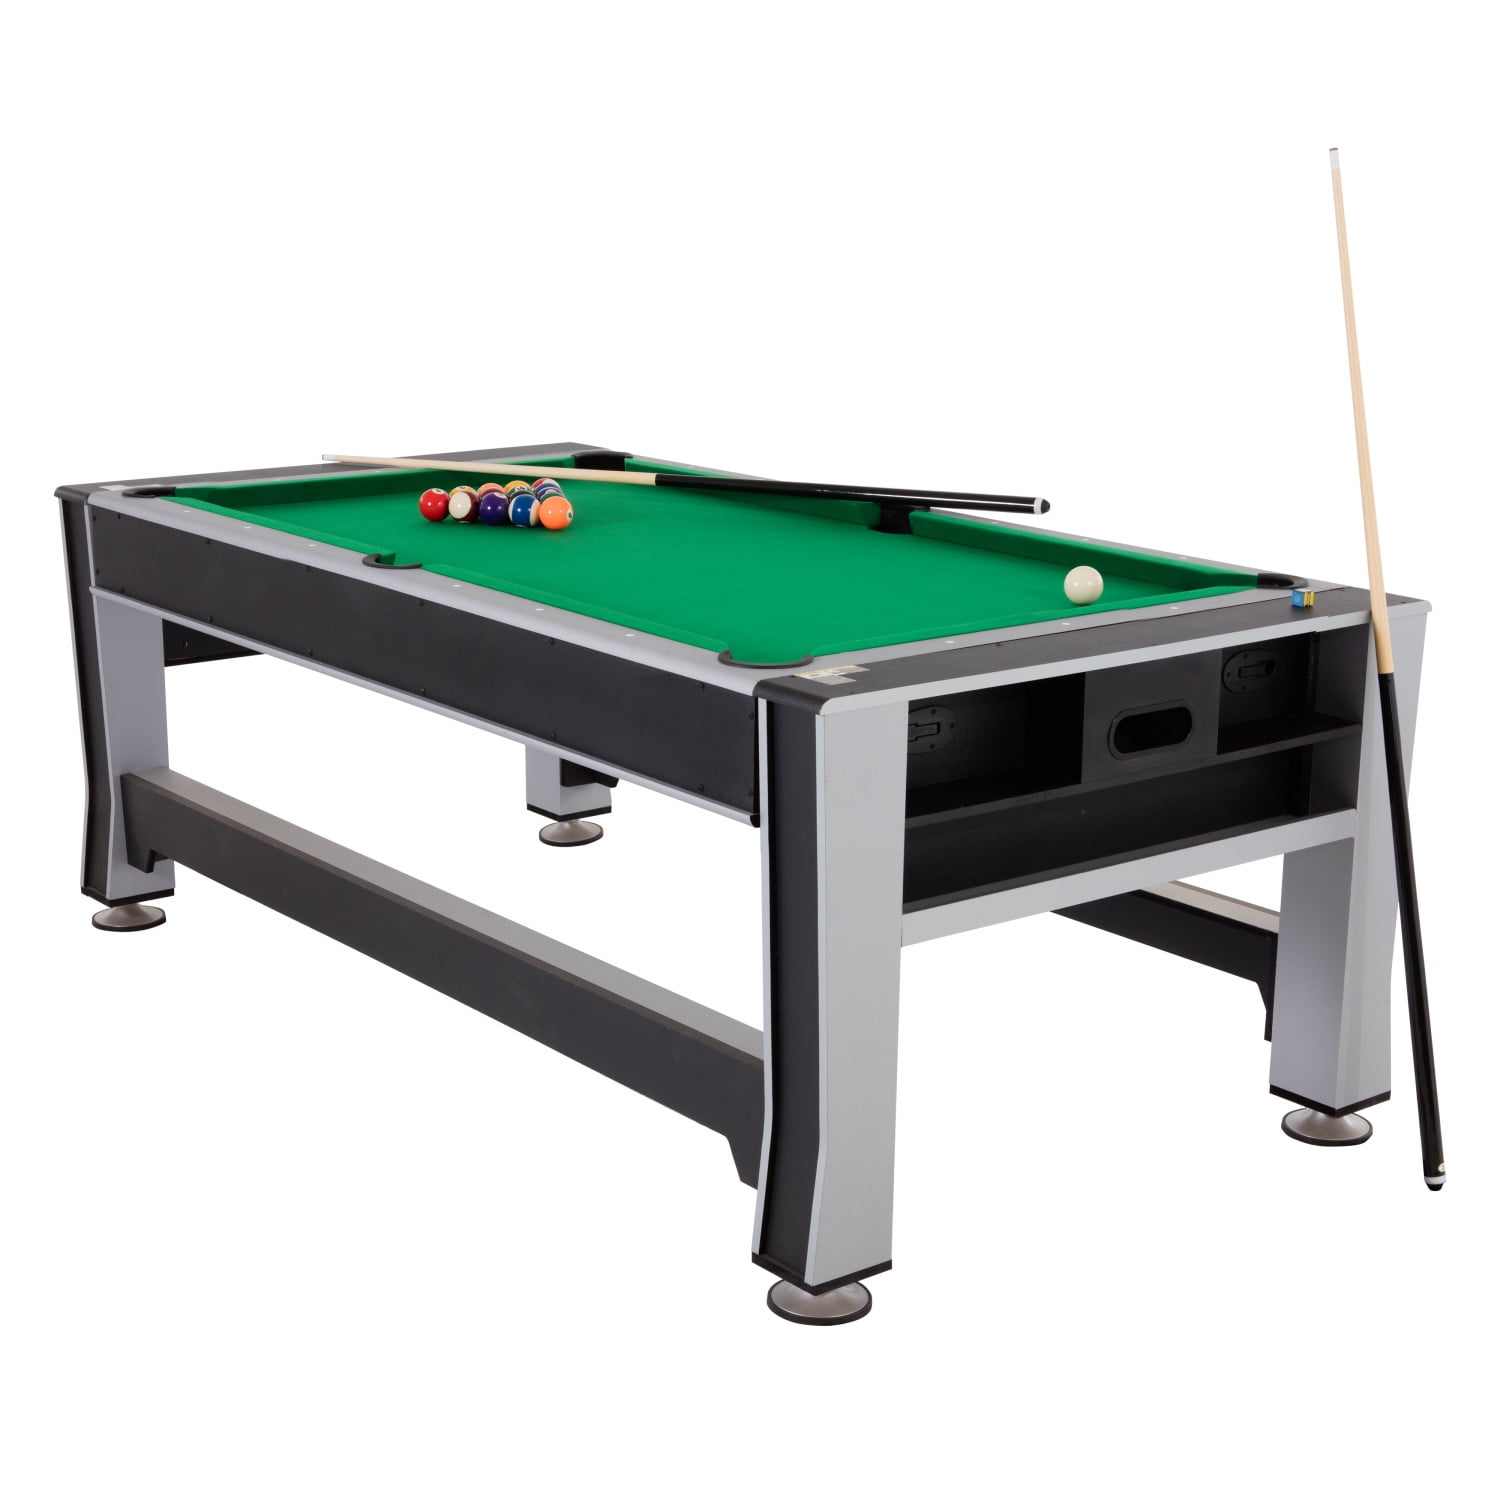 Air Hockey Ping Pong Billiards Details about   Triumph 4 in 1 Rotating Swivel Multigame Table 